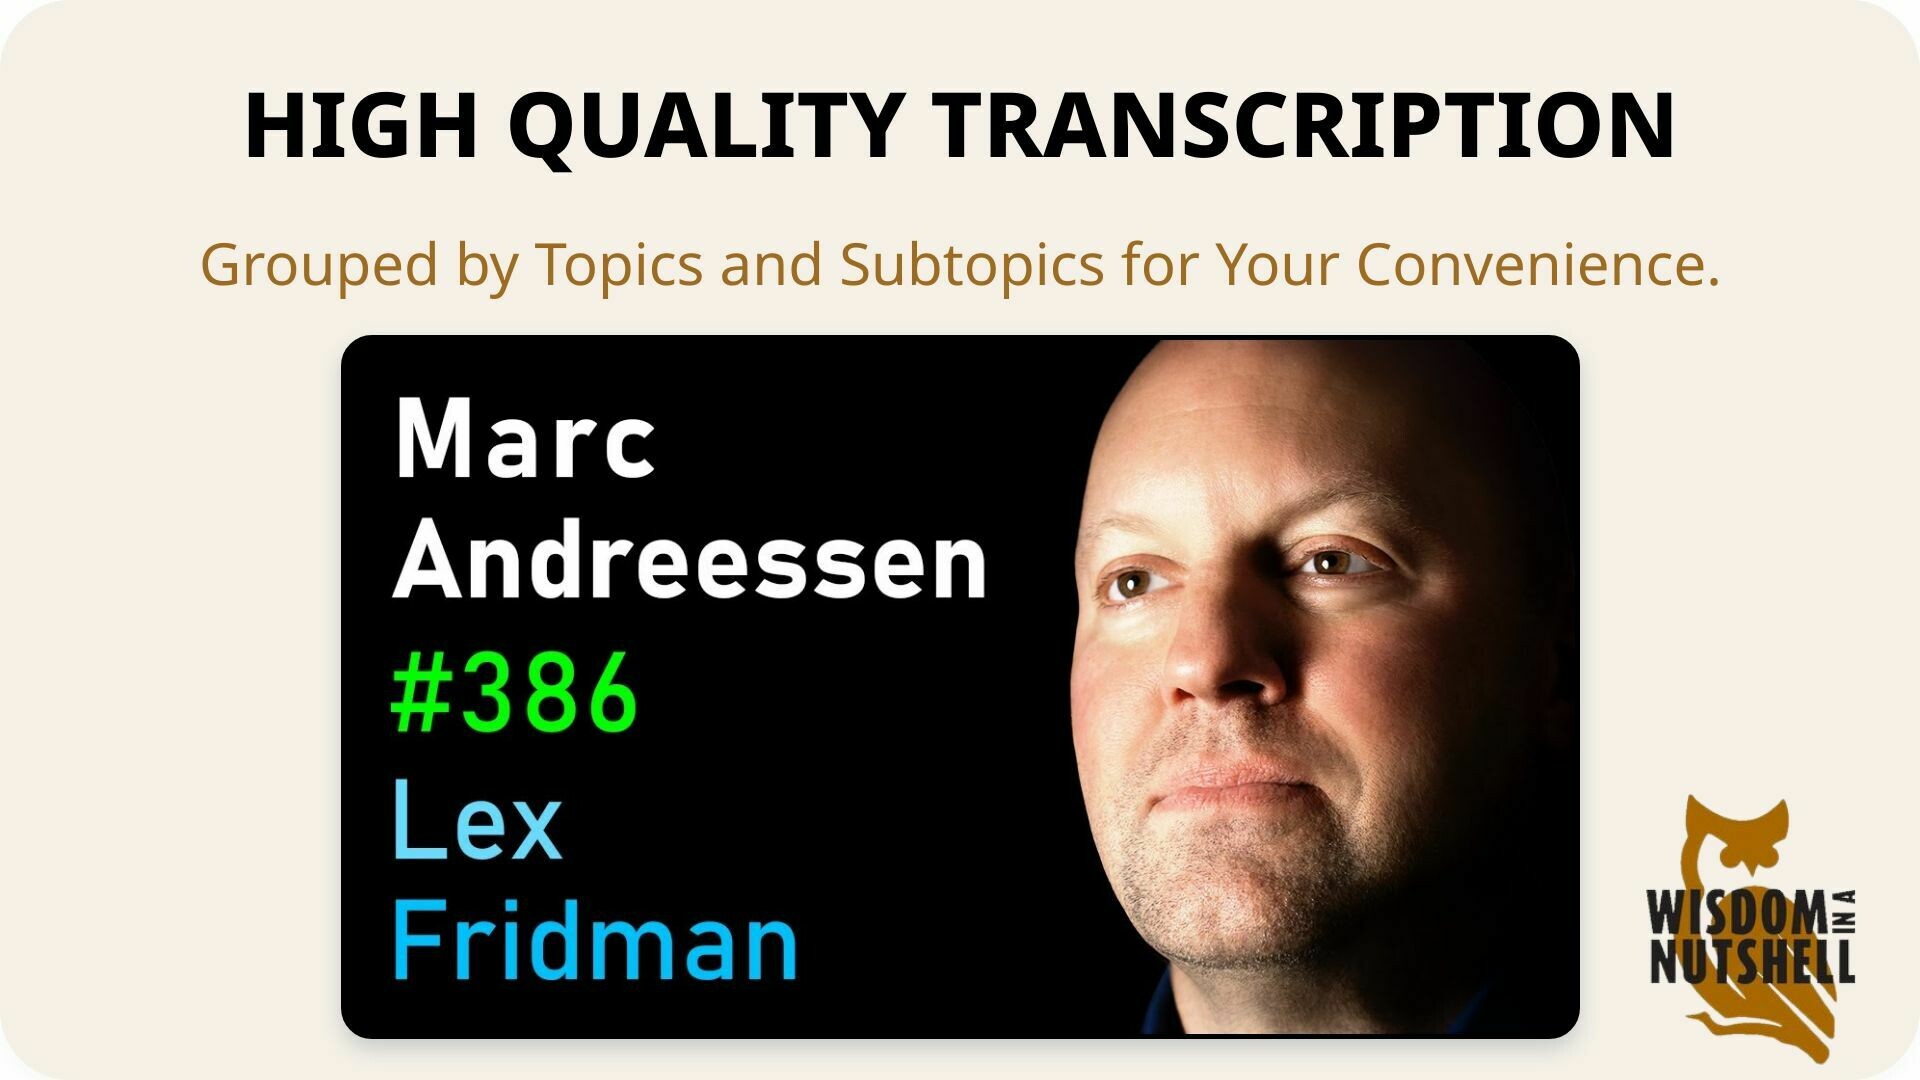 Lex Fridman Net Worth: How Much is the AI Researcher and Podcaster Worth? 